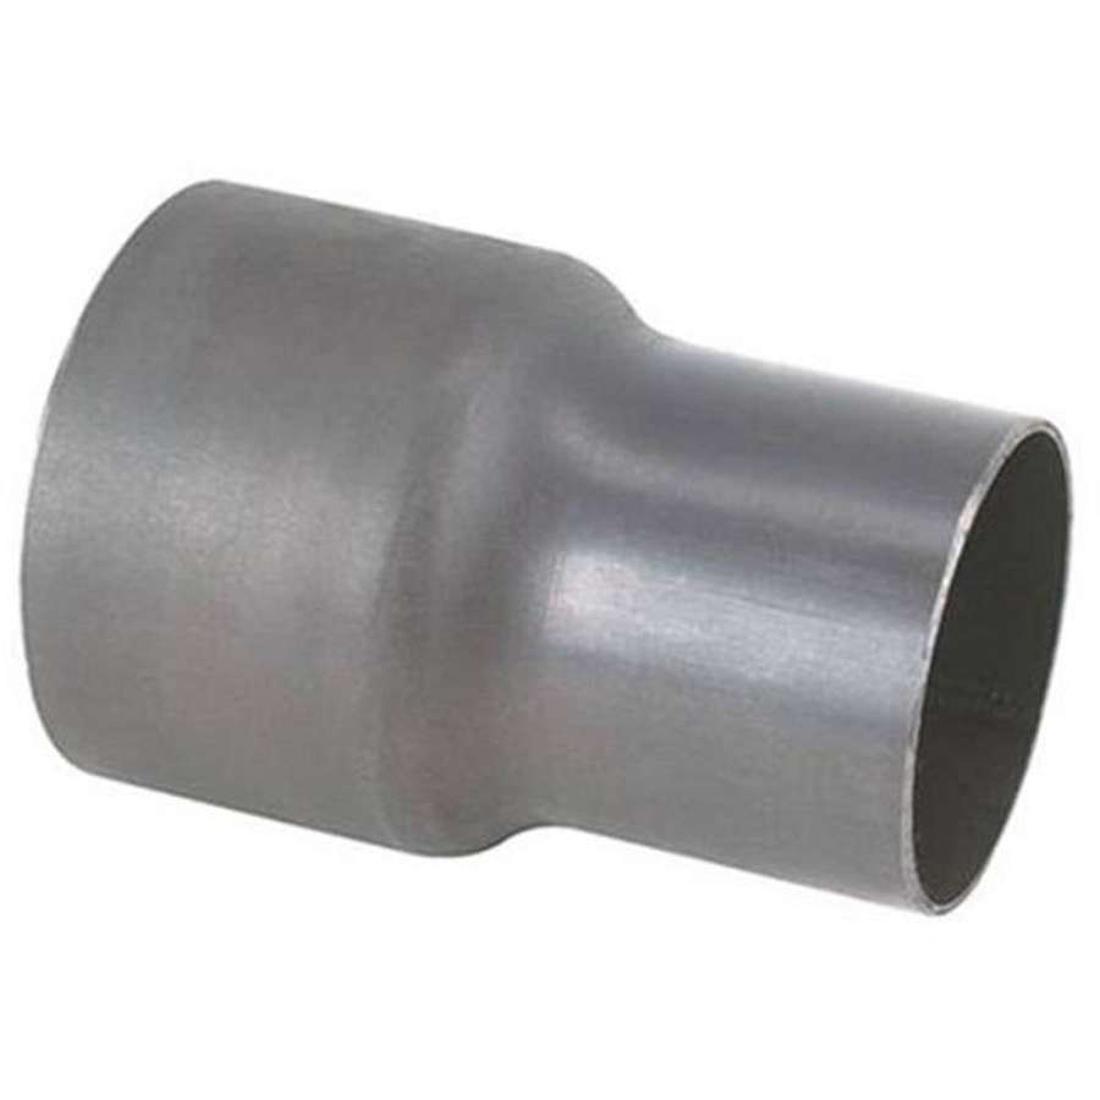 Exhaust Pipe Reducer 2.5" 63mm - 3" 76mm Mild Steel image